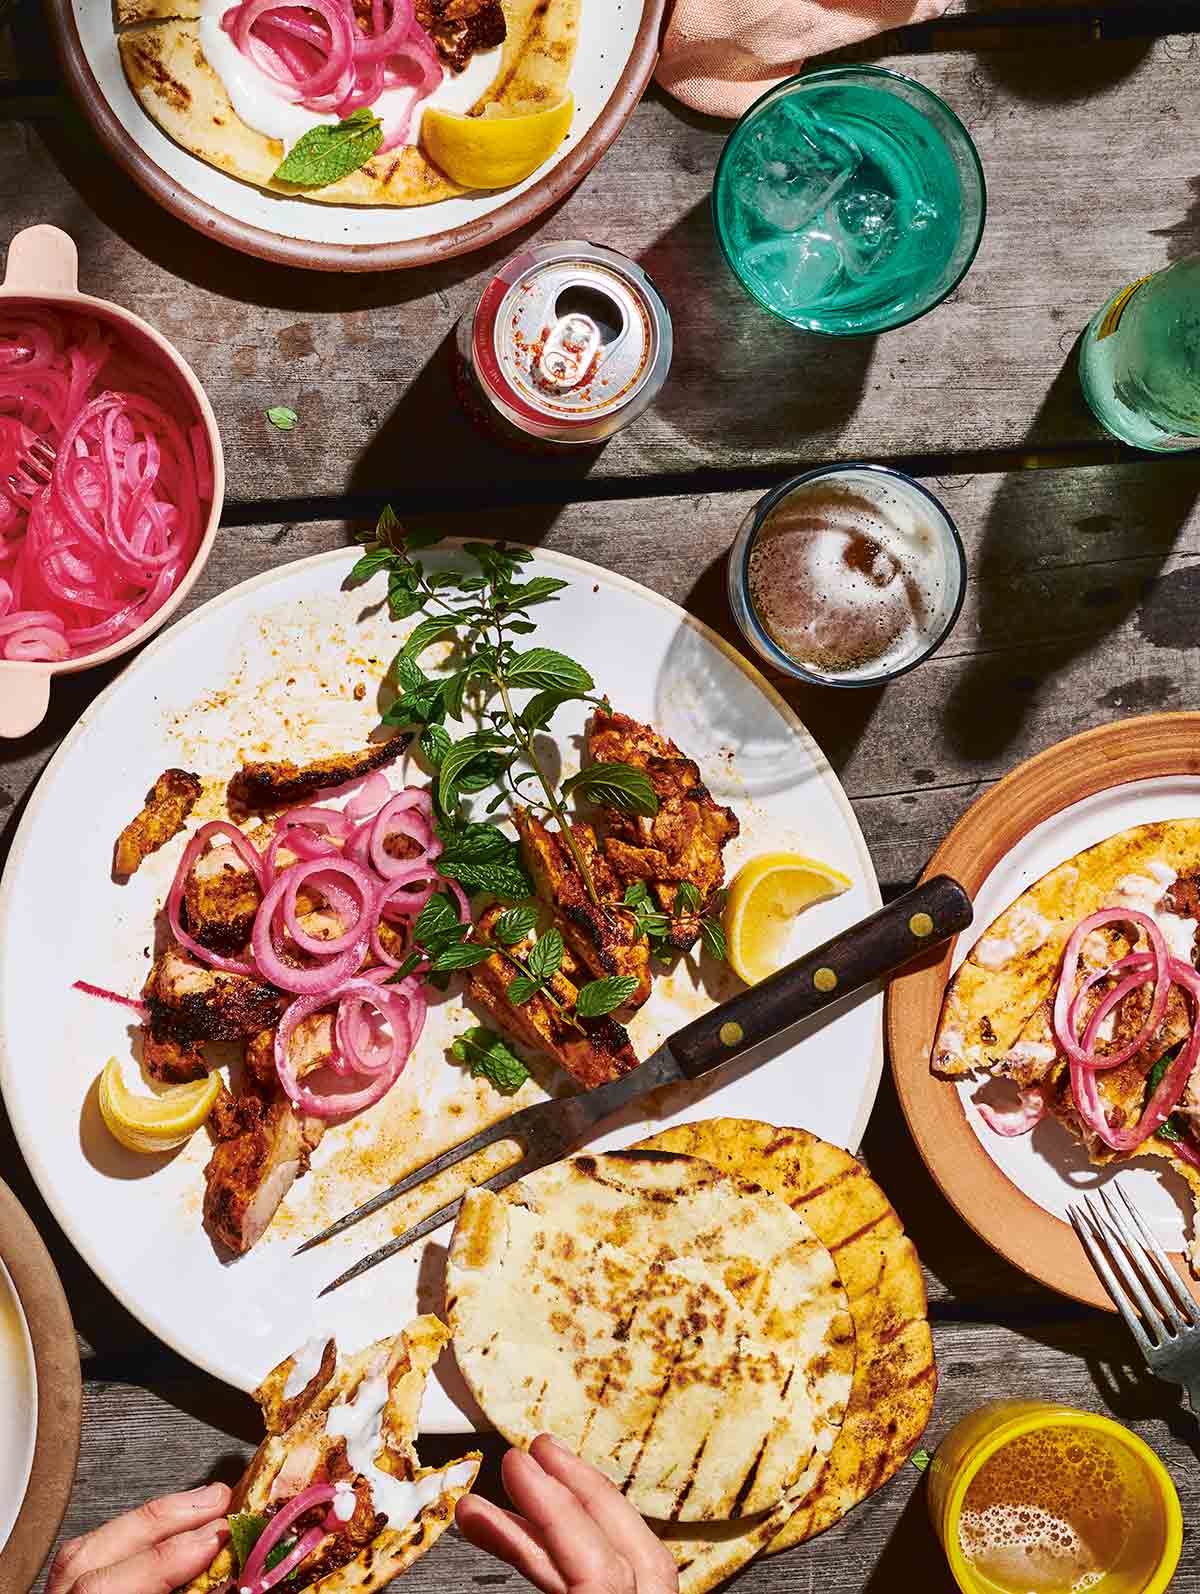 A platter of grilled boneless chicken thighs topped with pickled red onion, mint, lemon, and pita on the side.